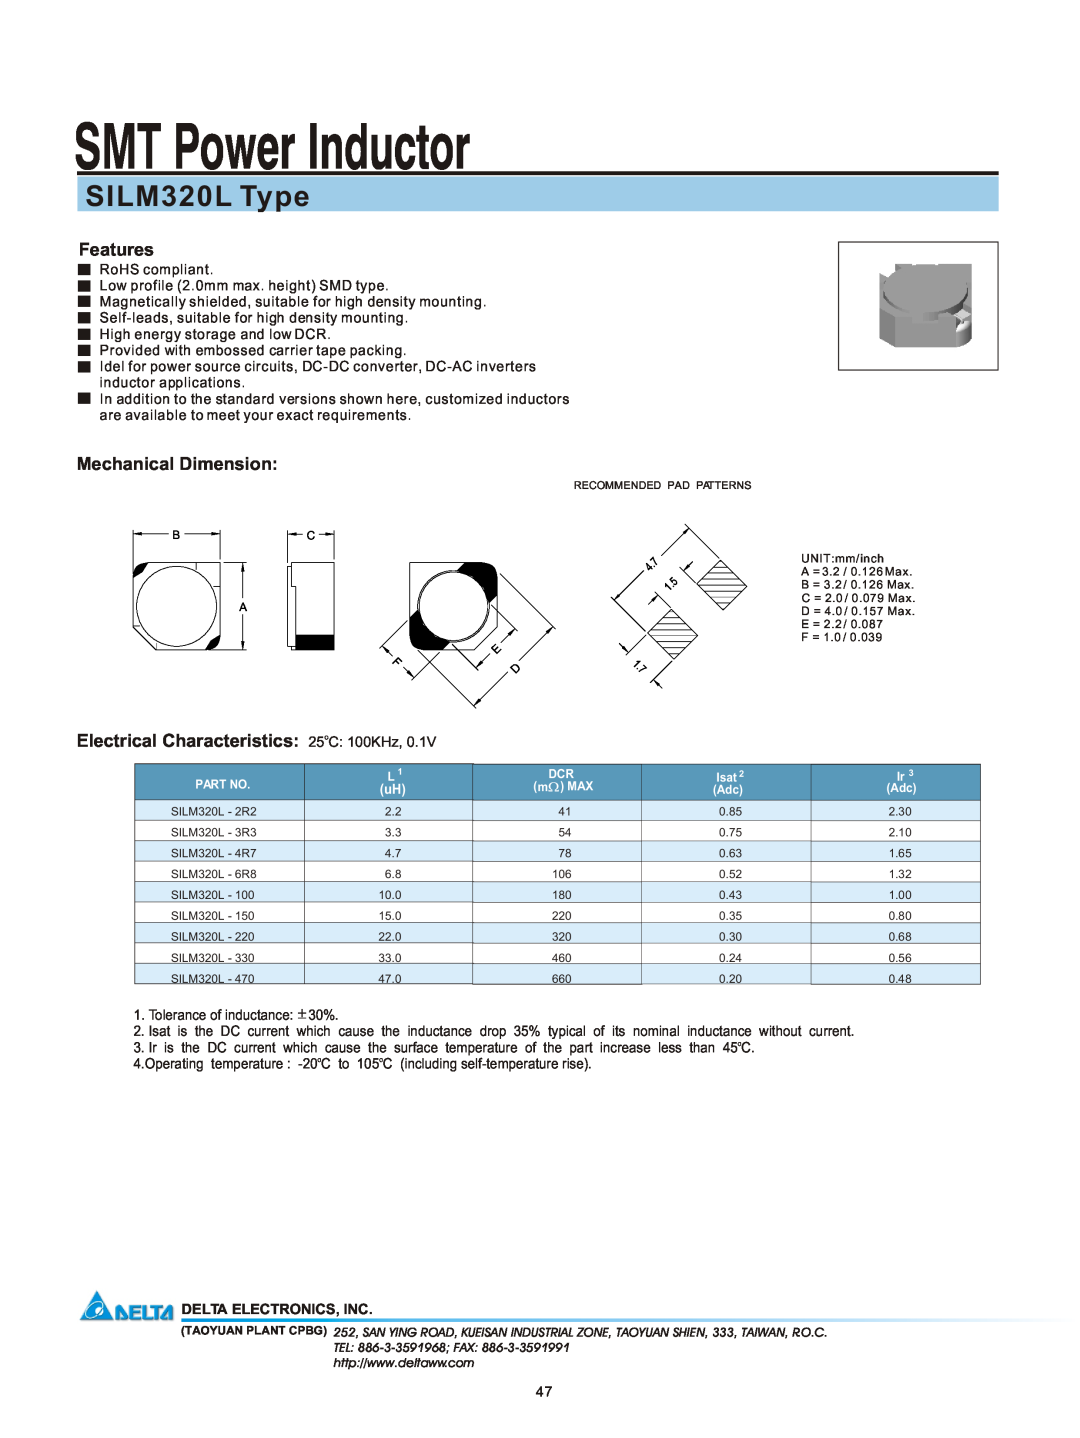 Delta Electronics manual SMT Power Inductor, SILM320L Type, Features, Mechanical Dimension, Delta Electronics, Inc 